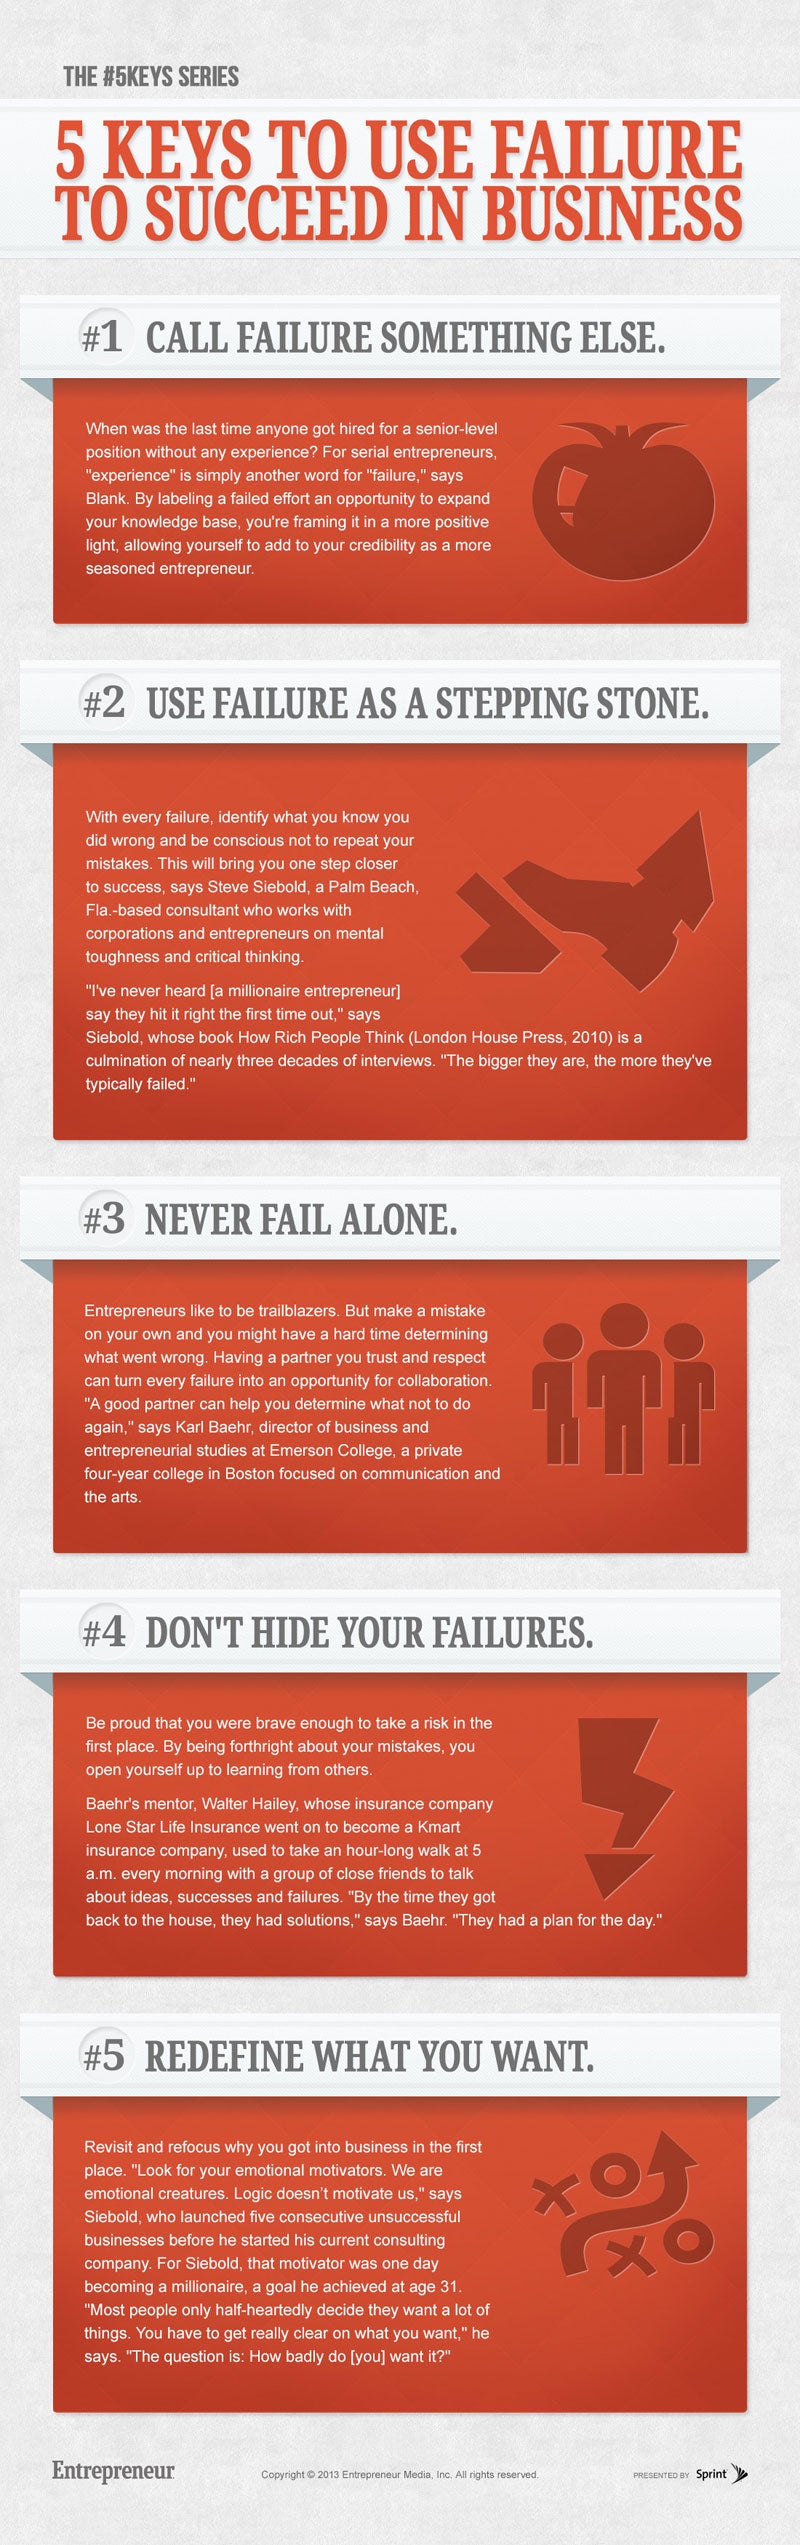 5 Keys to Use Failure to Succeed in Business